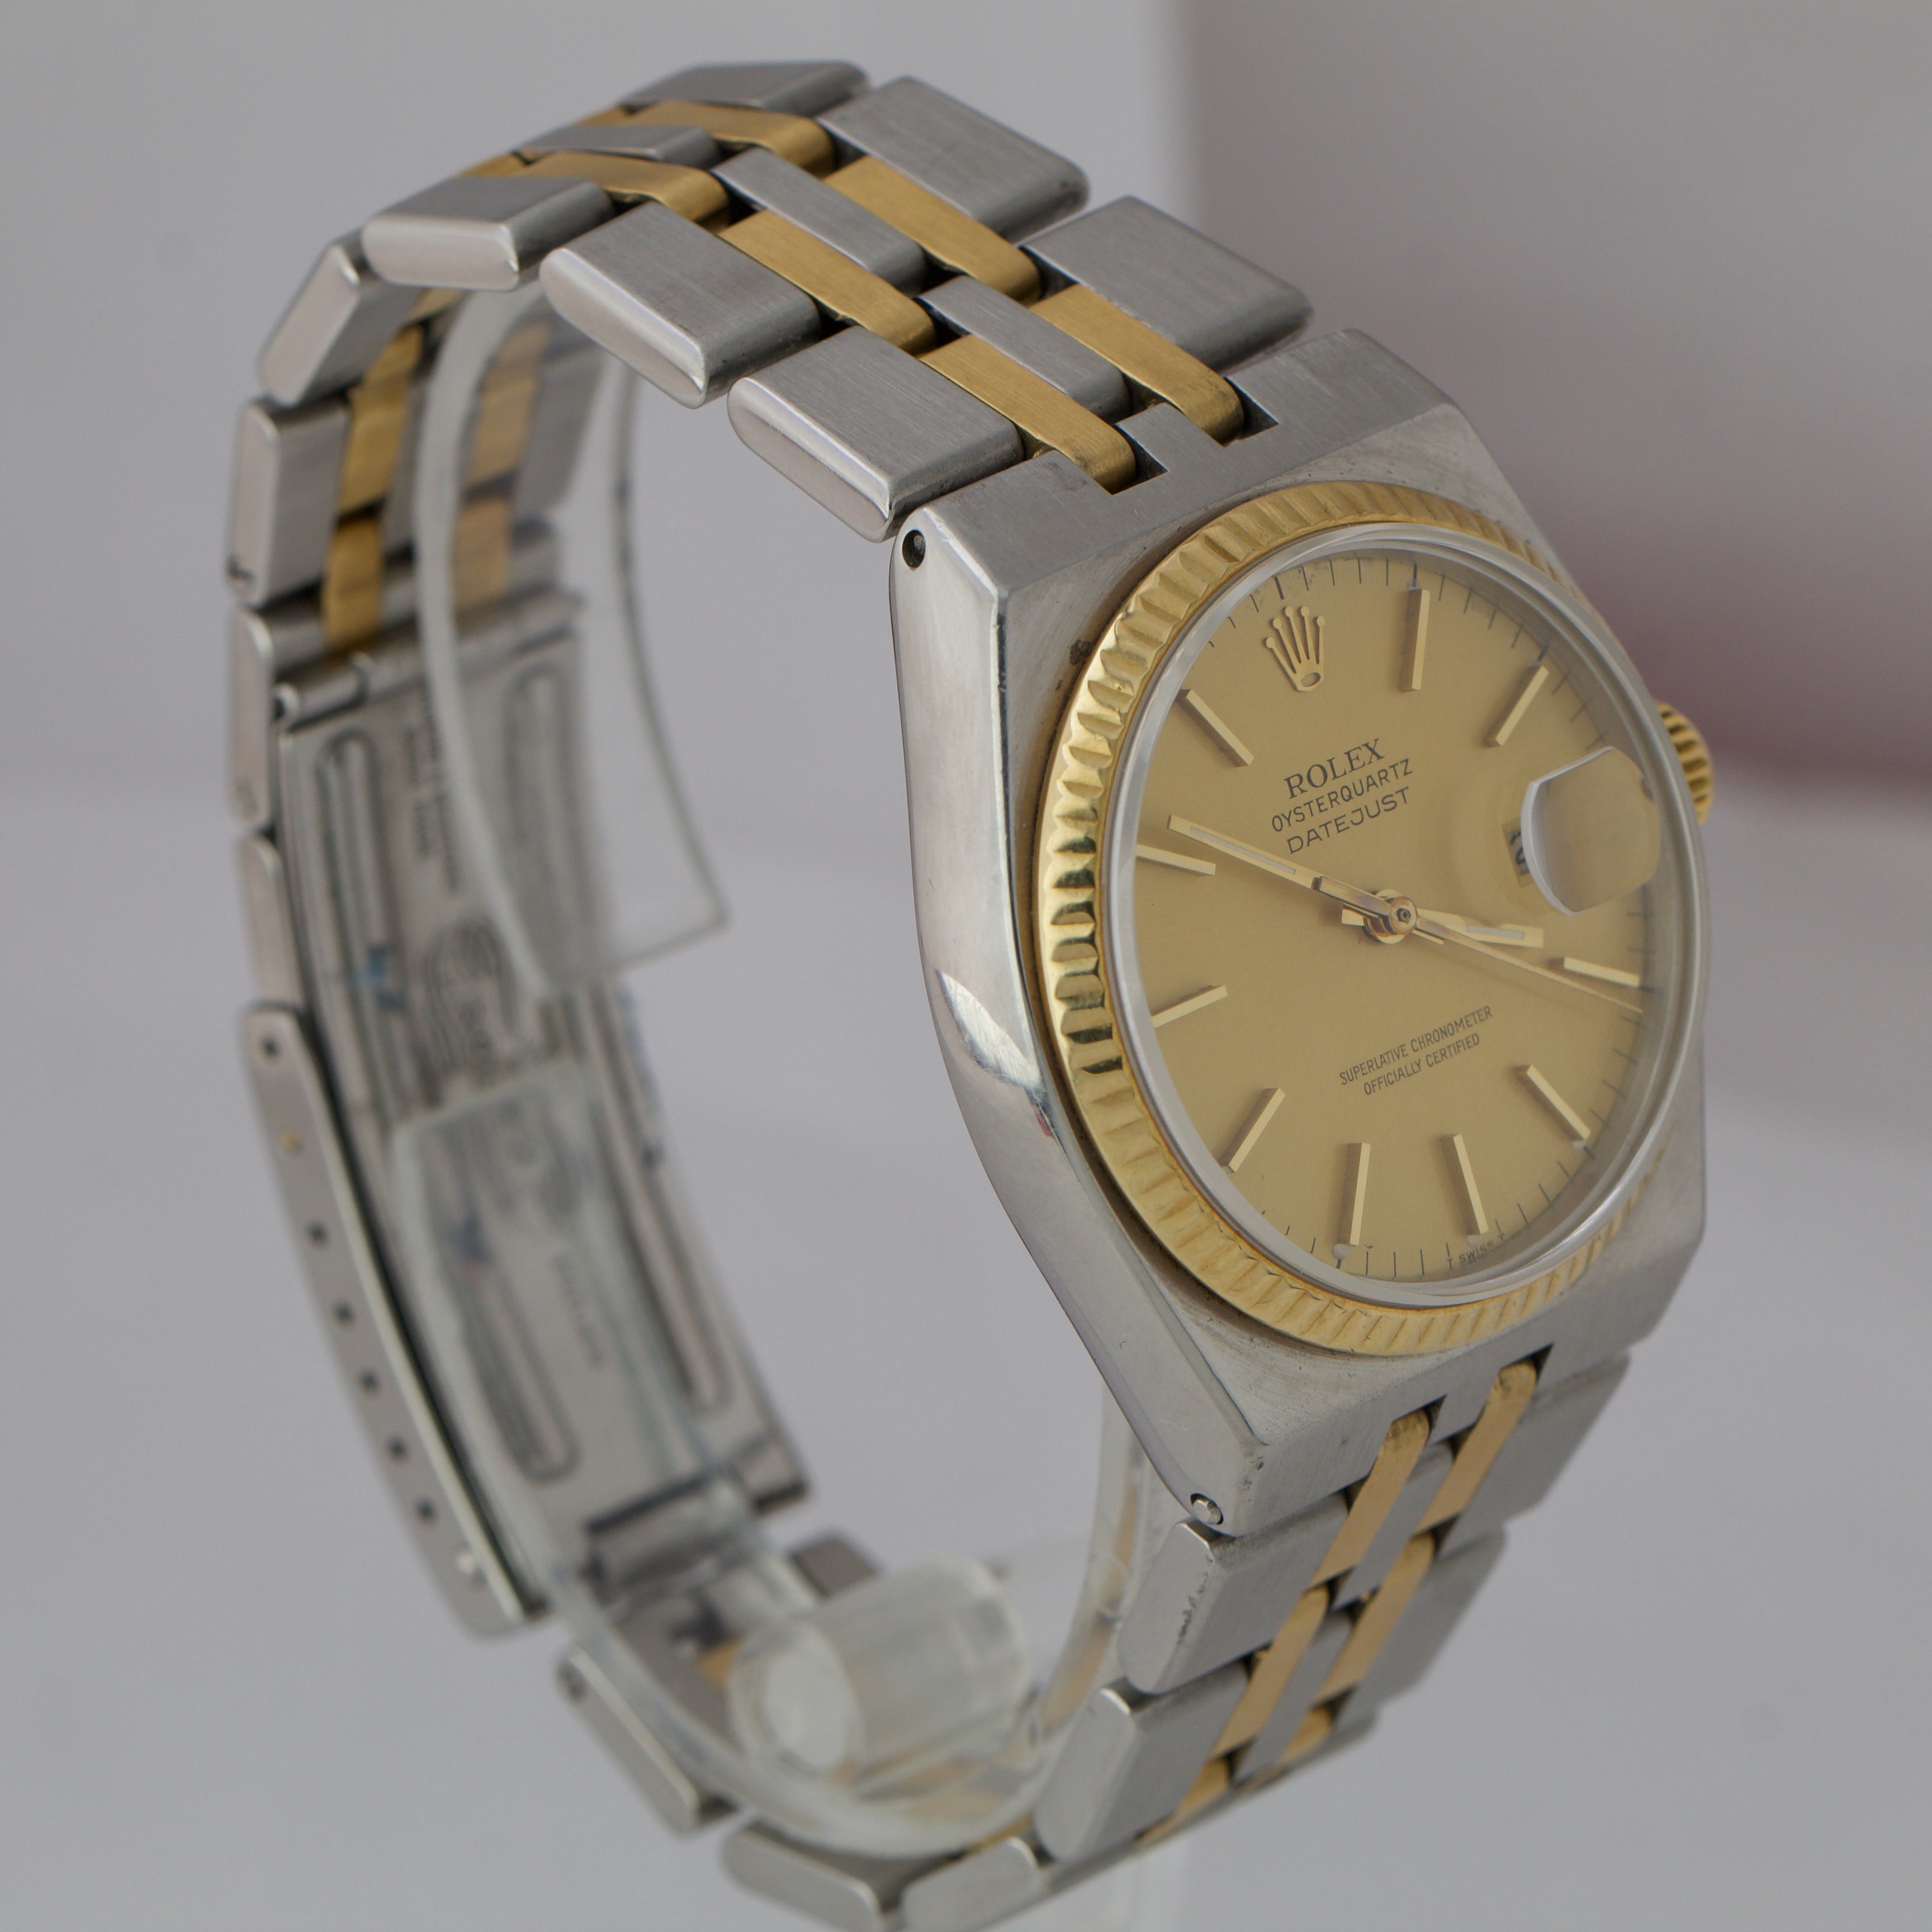 1989 Rolex Oysterquartz DateJust Two-Tone Gold Stainless Integral Watch 17013